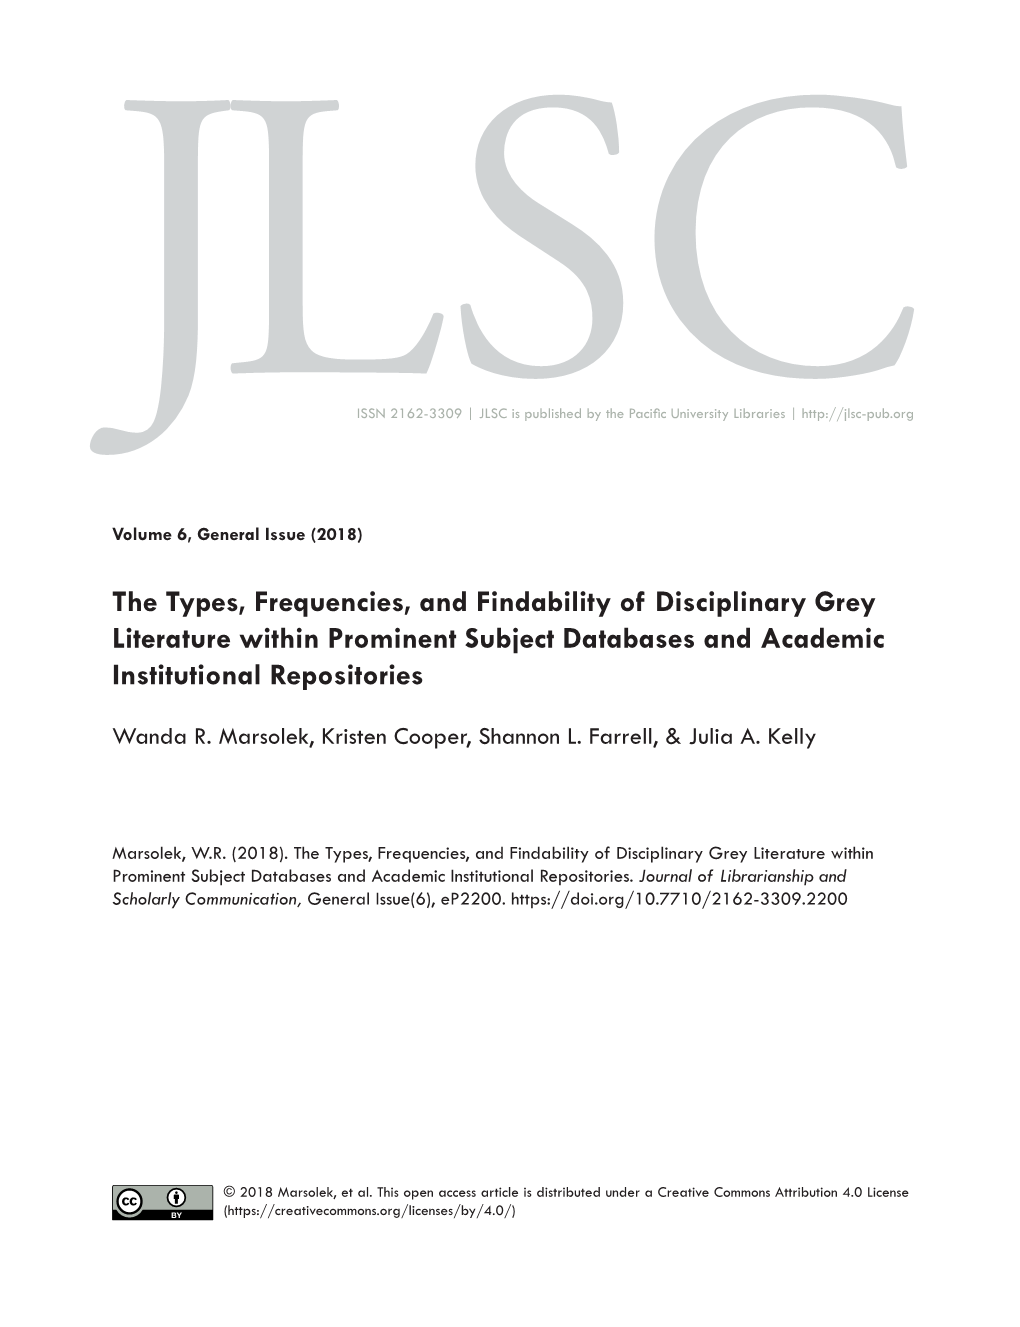 The Types, Frequencies, and Findability of Disciplinary Grey Literature Within Prominent Subject Databases and Academic Institutional Repositories